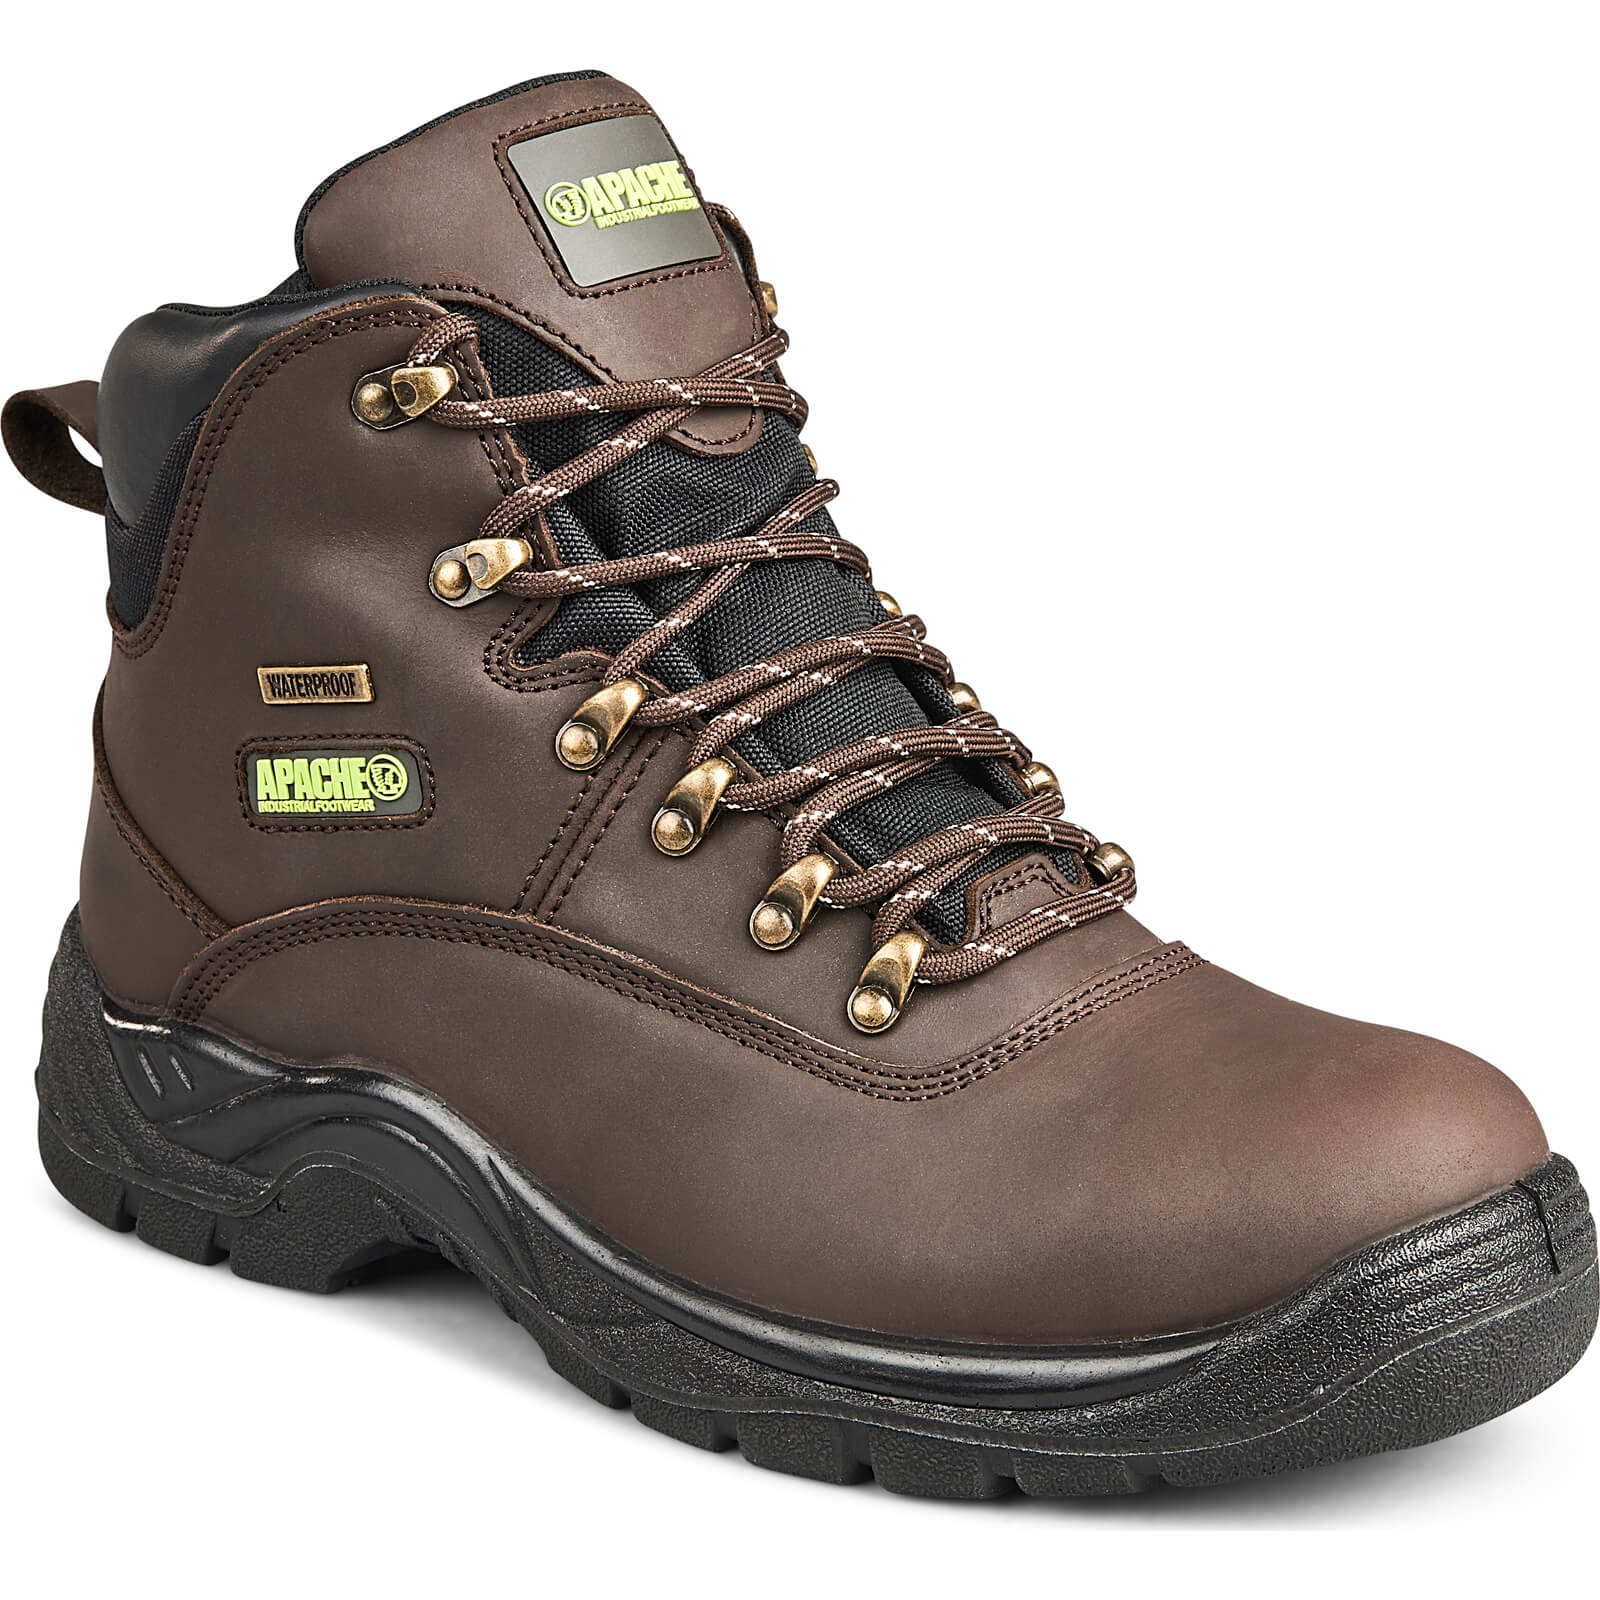 Image of Apache SS81 Waterproof Safety Hiker Boots Brown Size 9